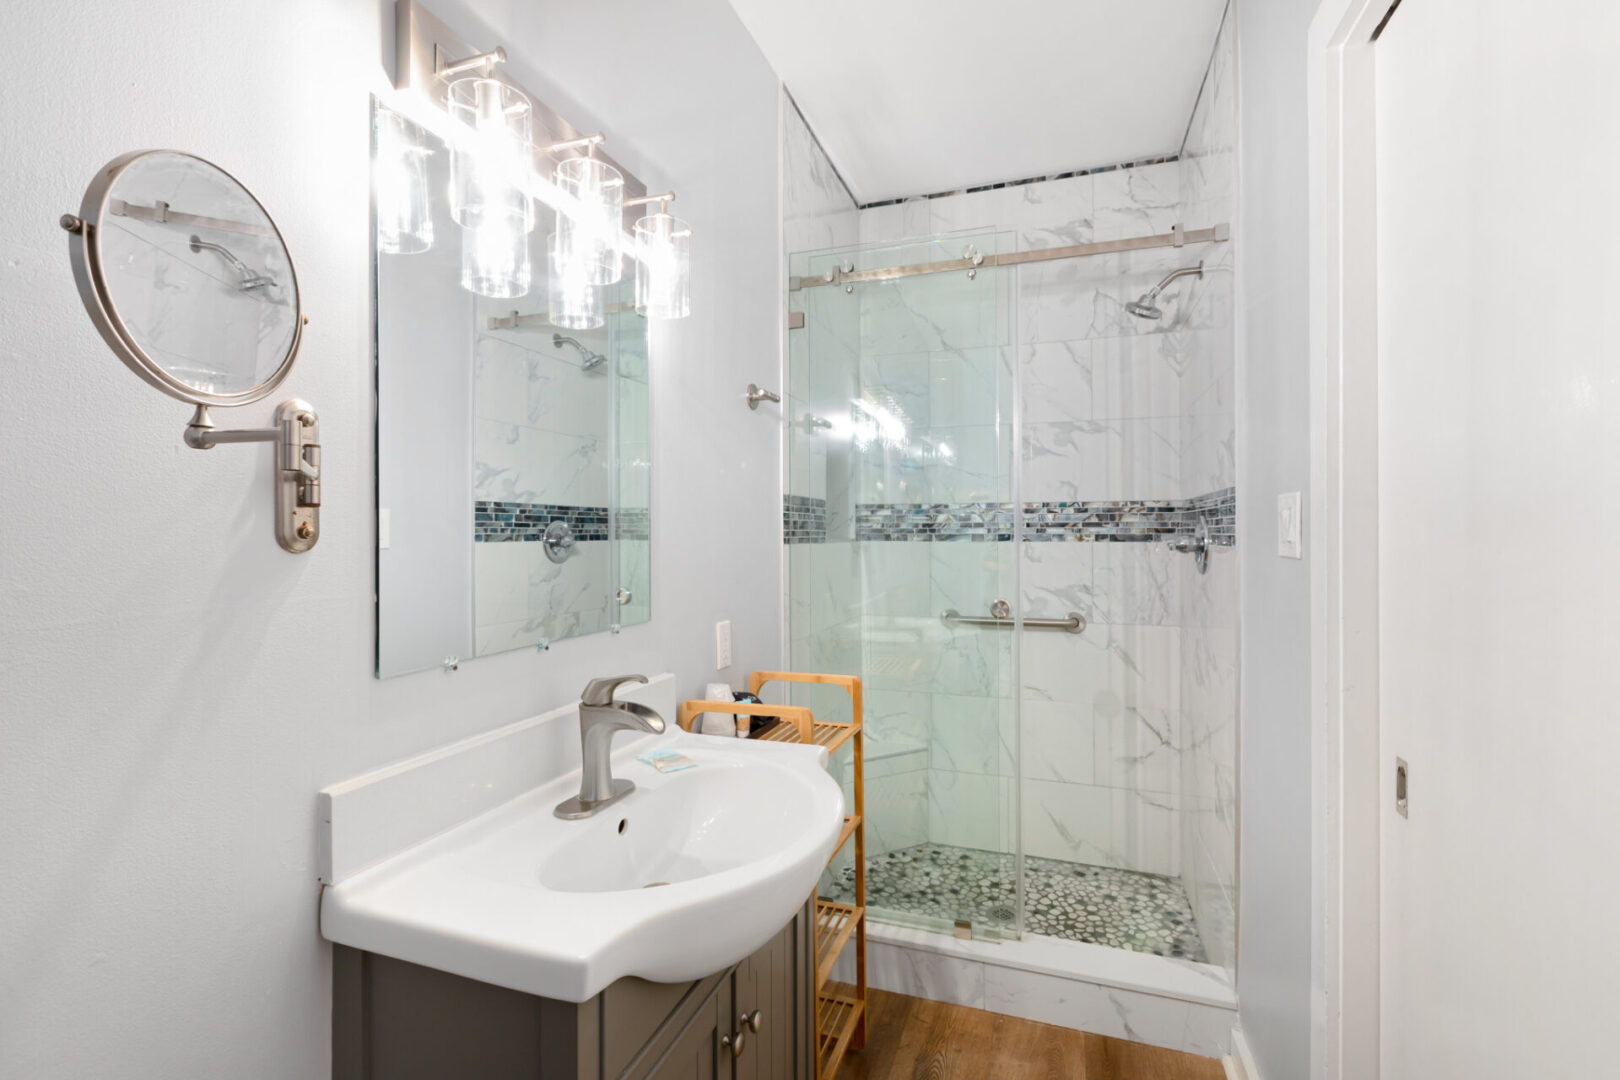 A bathroom with white interiors